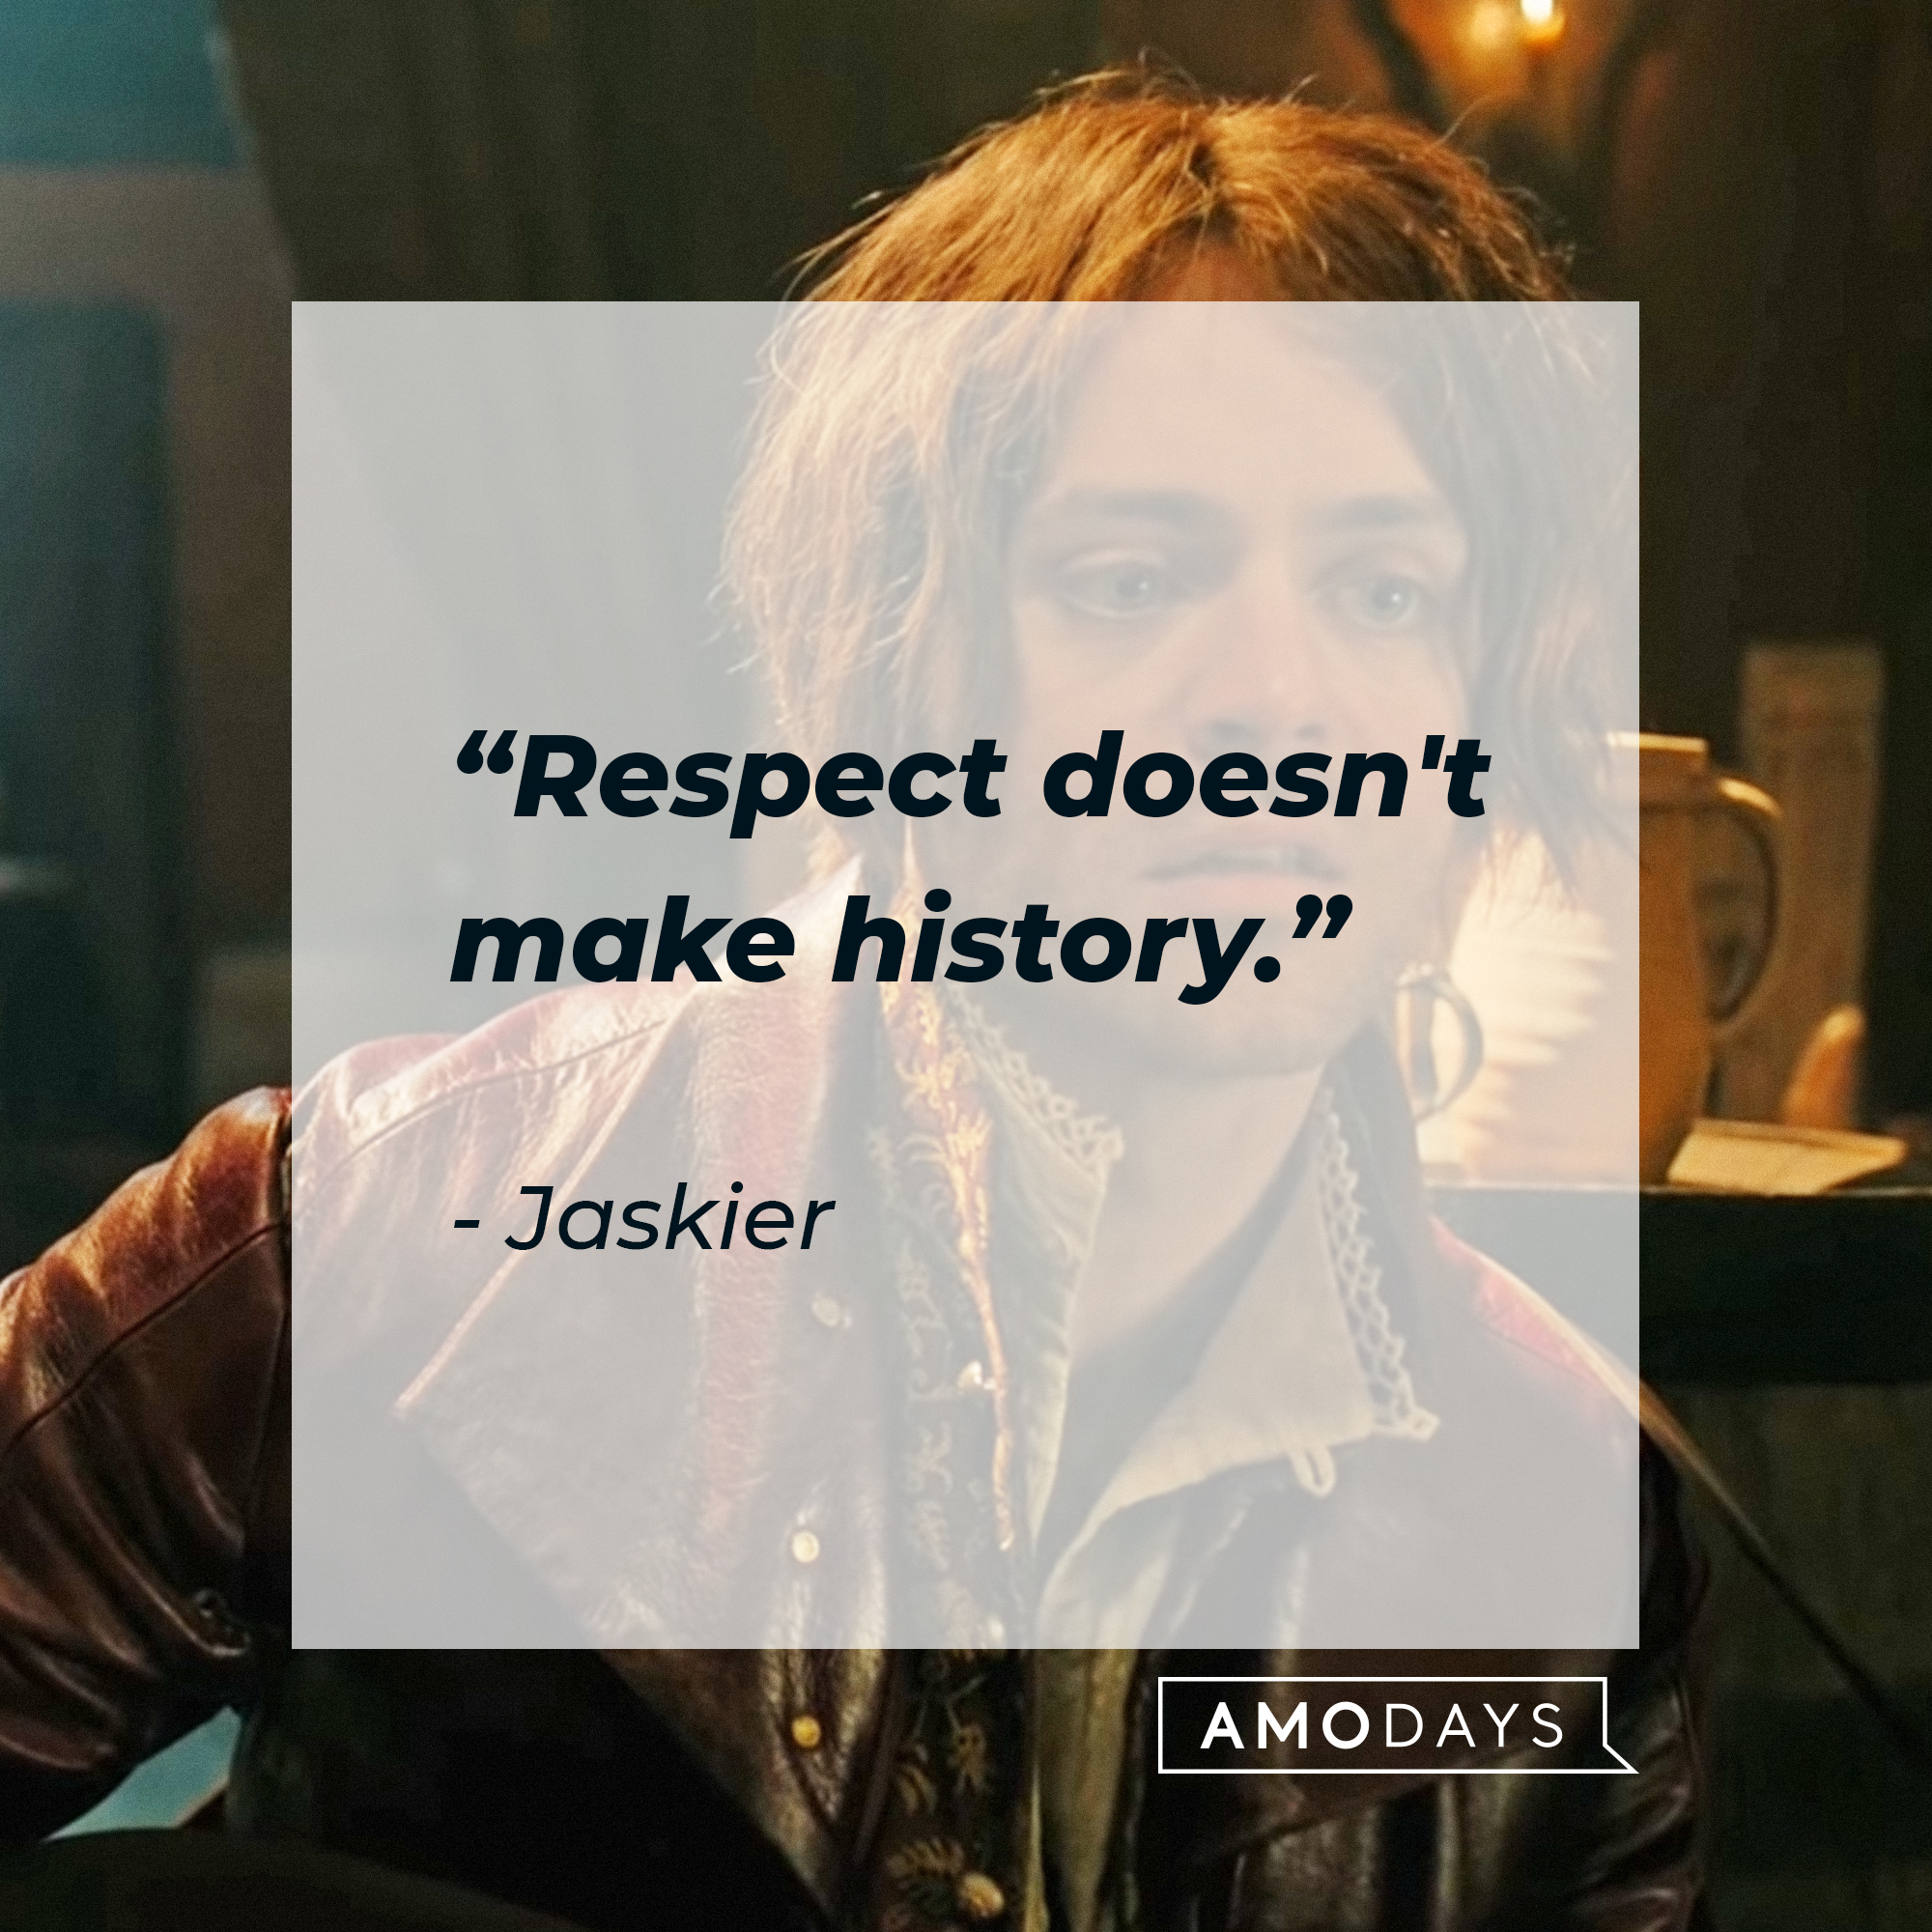 Jaskier's quote: "Respect doesn't make history." | Source: YouTube/Netflix